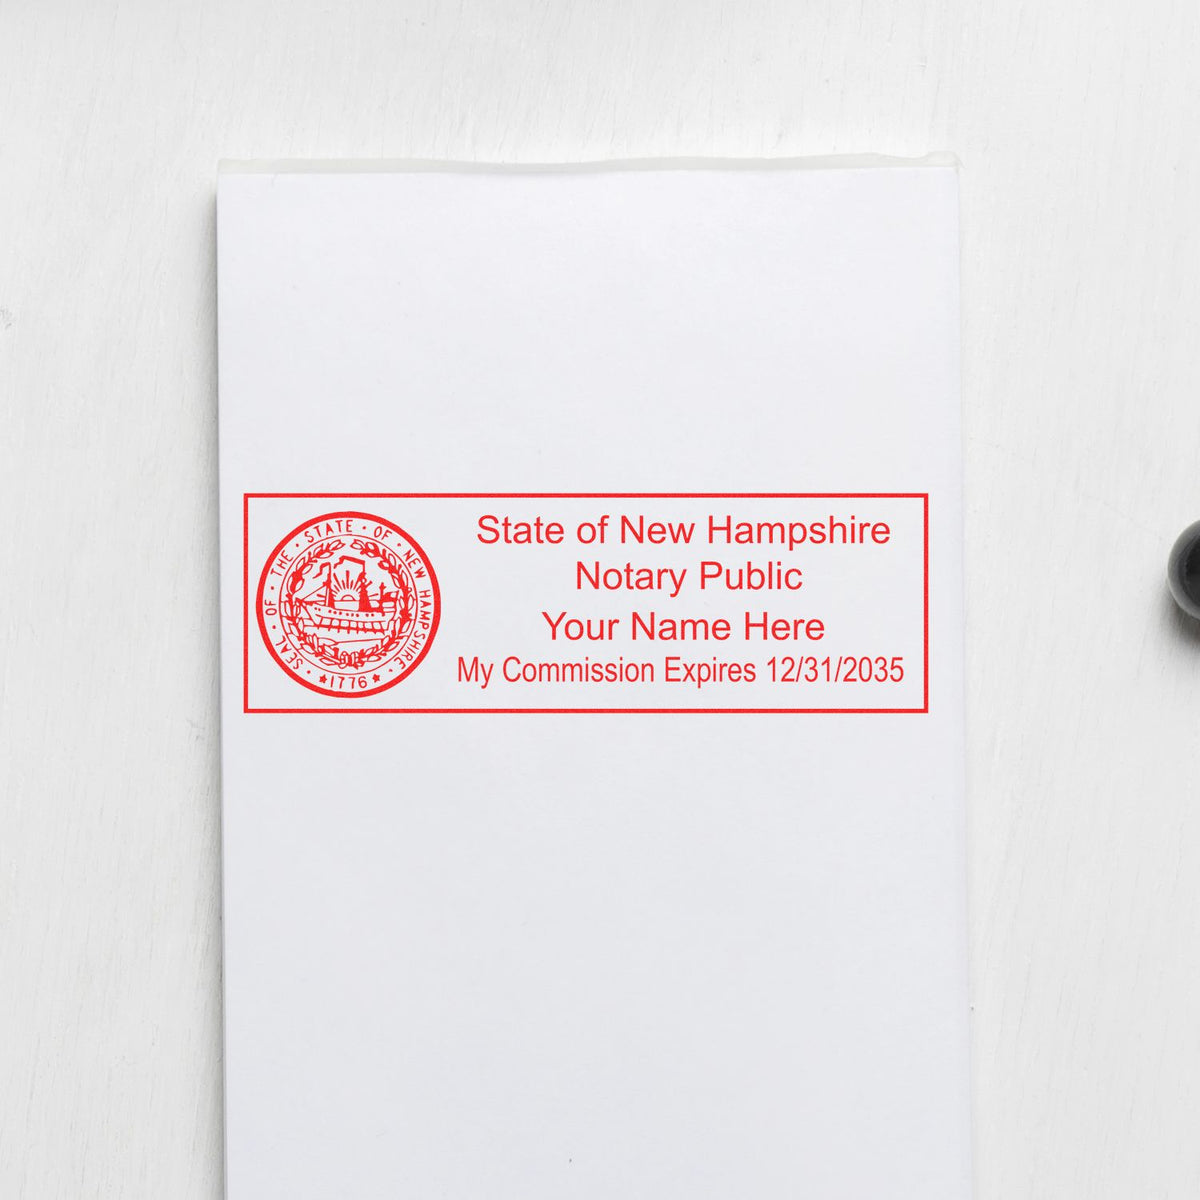 Another Example of a stamped impression of the Super Slim New Hampshire Notary Public Stamp on a piece of office paper.